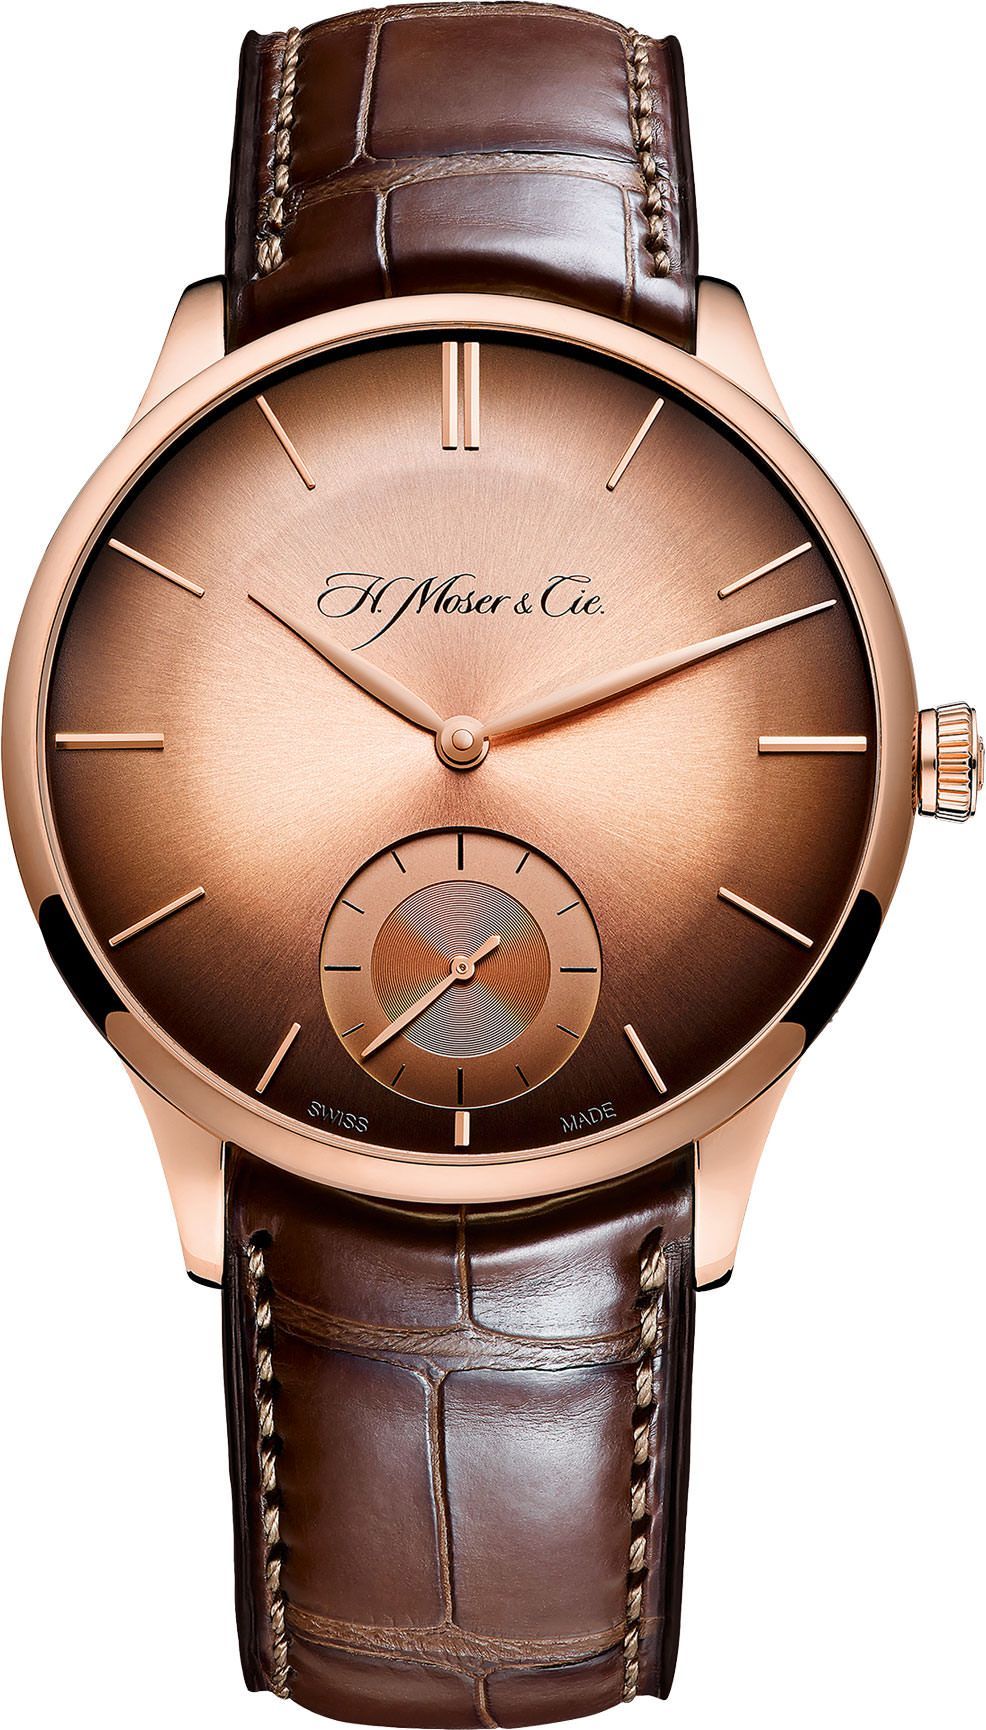 H. Moser & Cie. Venturer Small Seconds Rose Gold Dial 39 mm Manual Winding Watch For Men - 1